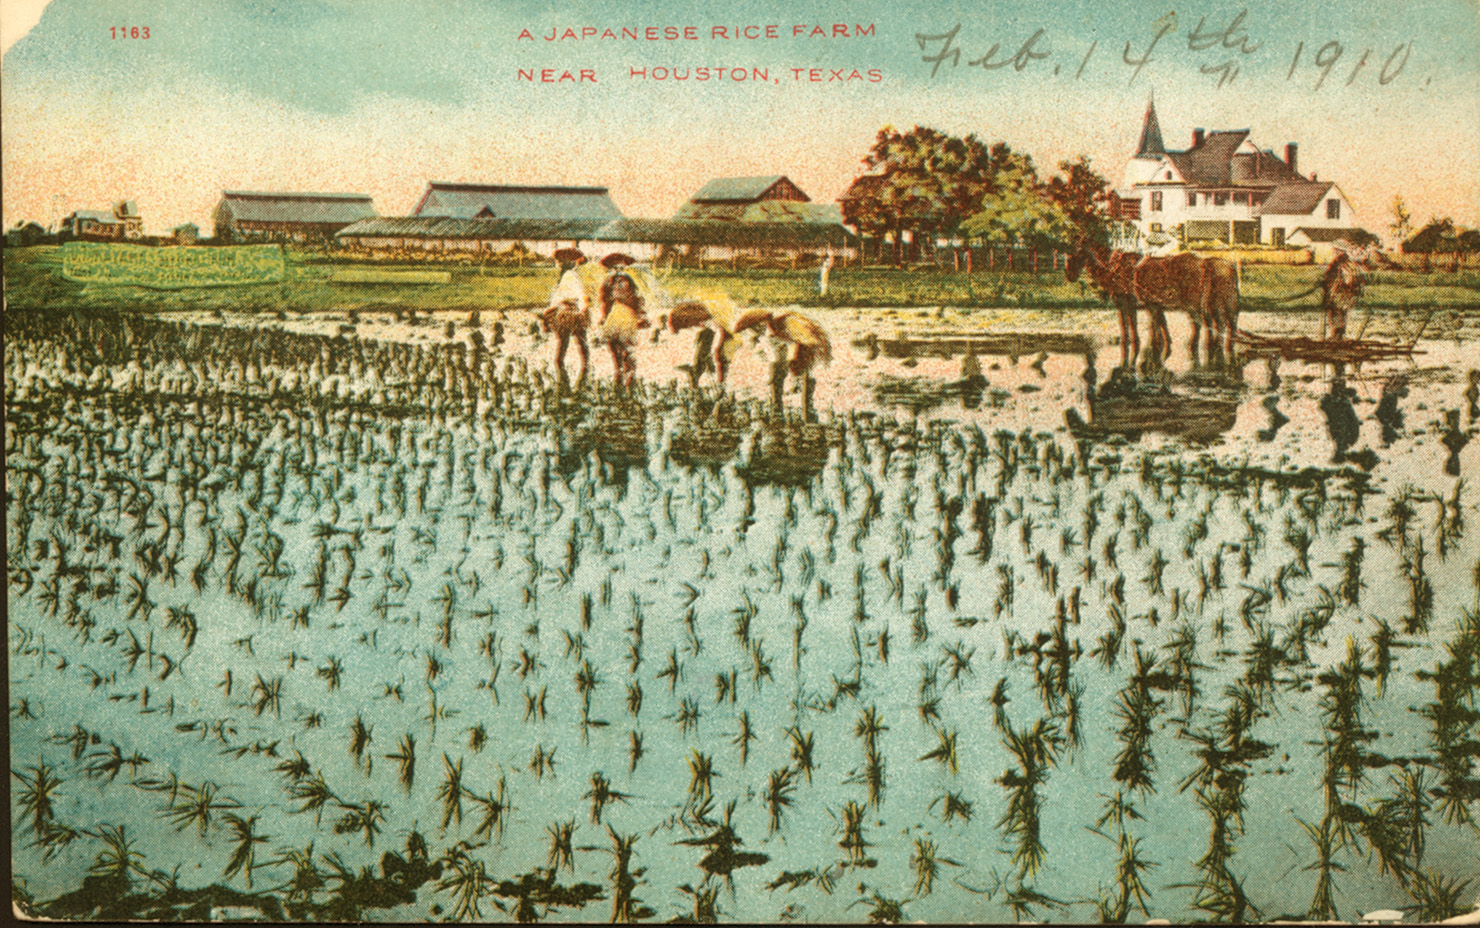 A Japanese rice farm outside Houston, Texas in the early 1900s. Credit: Jenkins Garrett Texas Postcard Collection, Public domain, via Wikimedia Commons